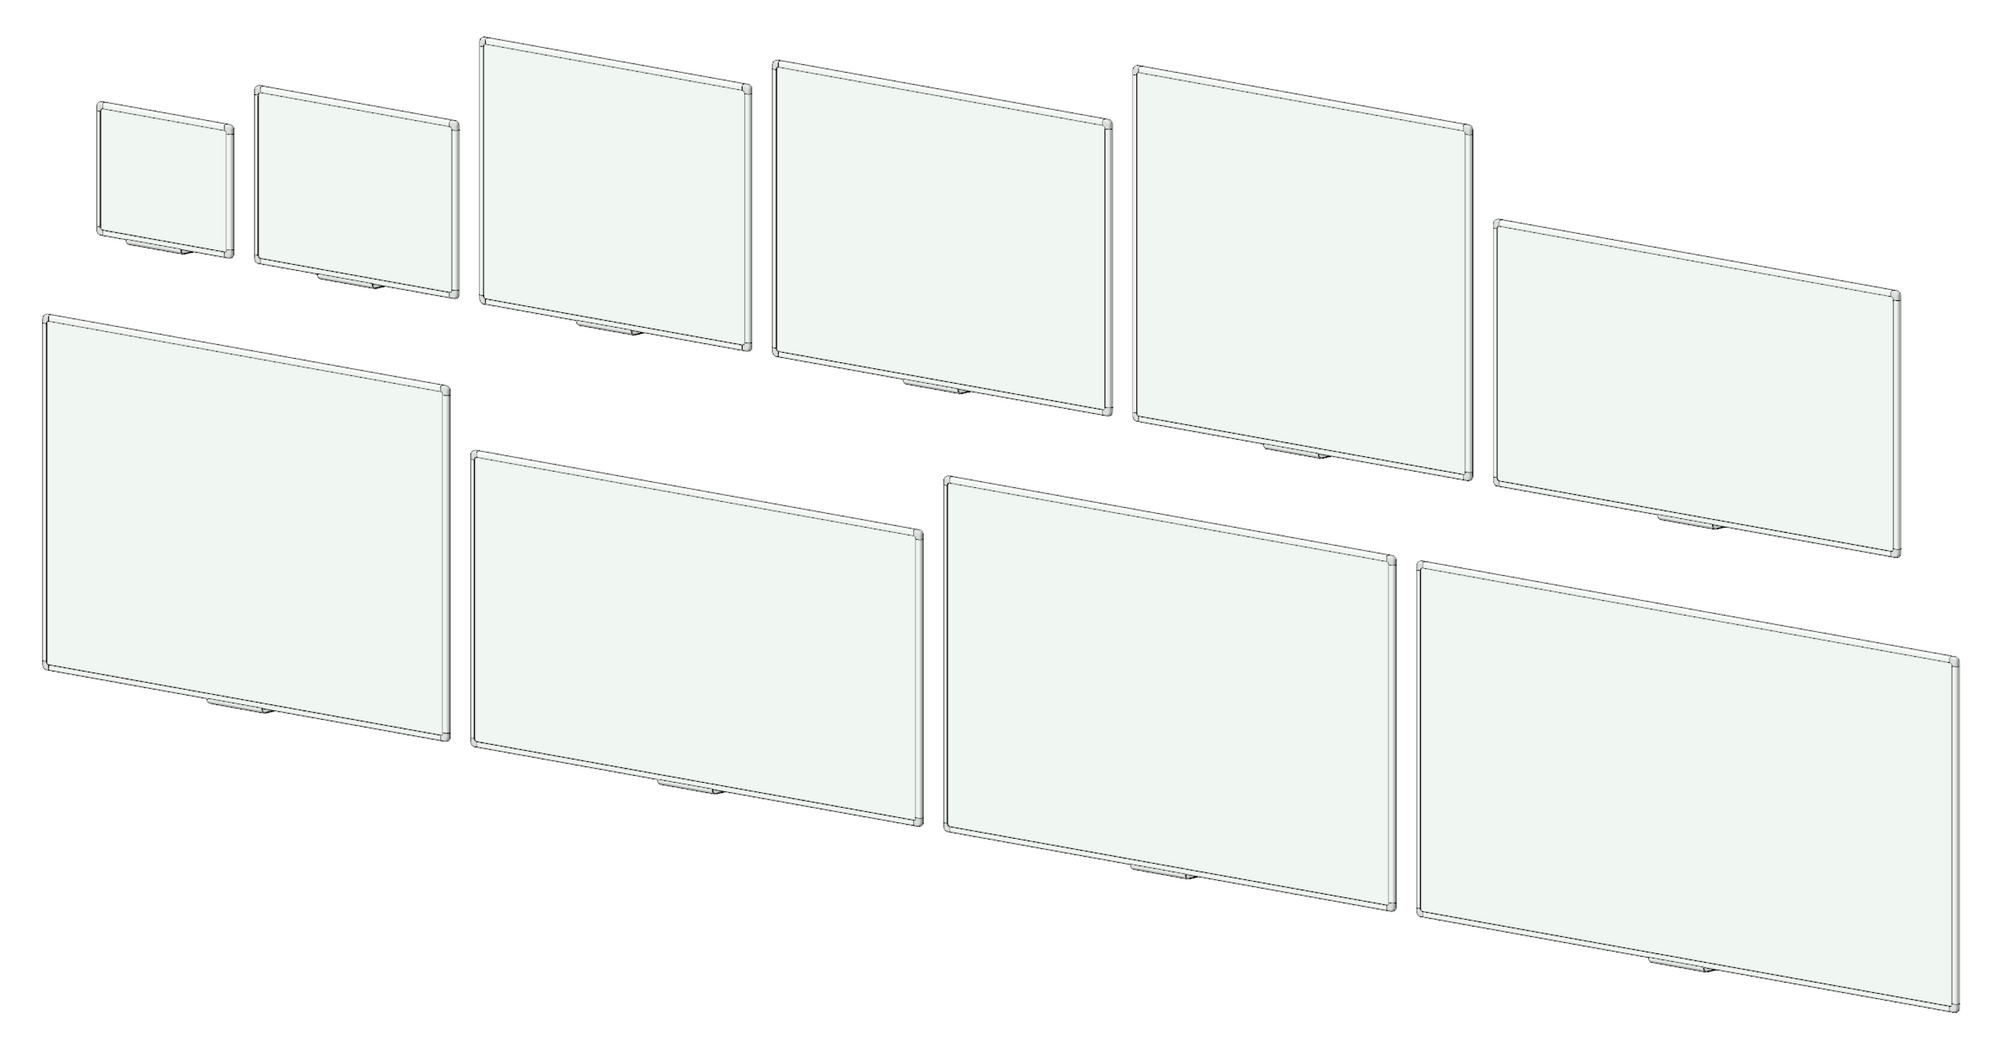 3D image showing whiteboards.